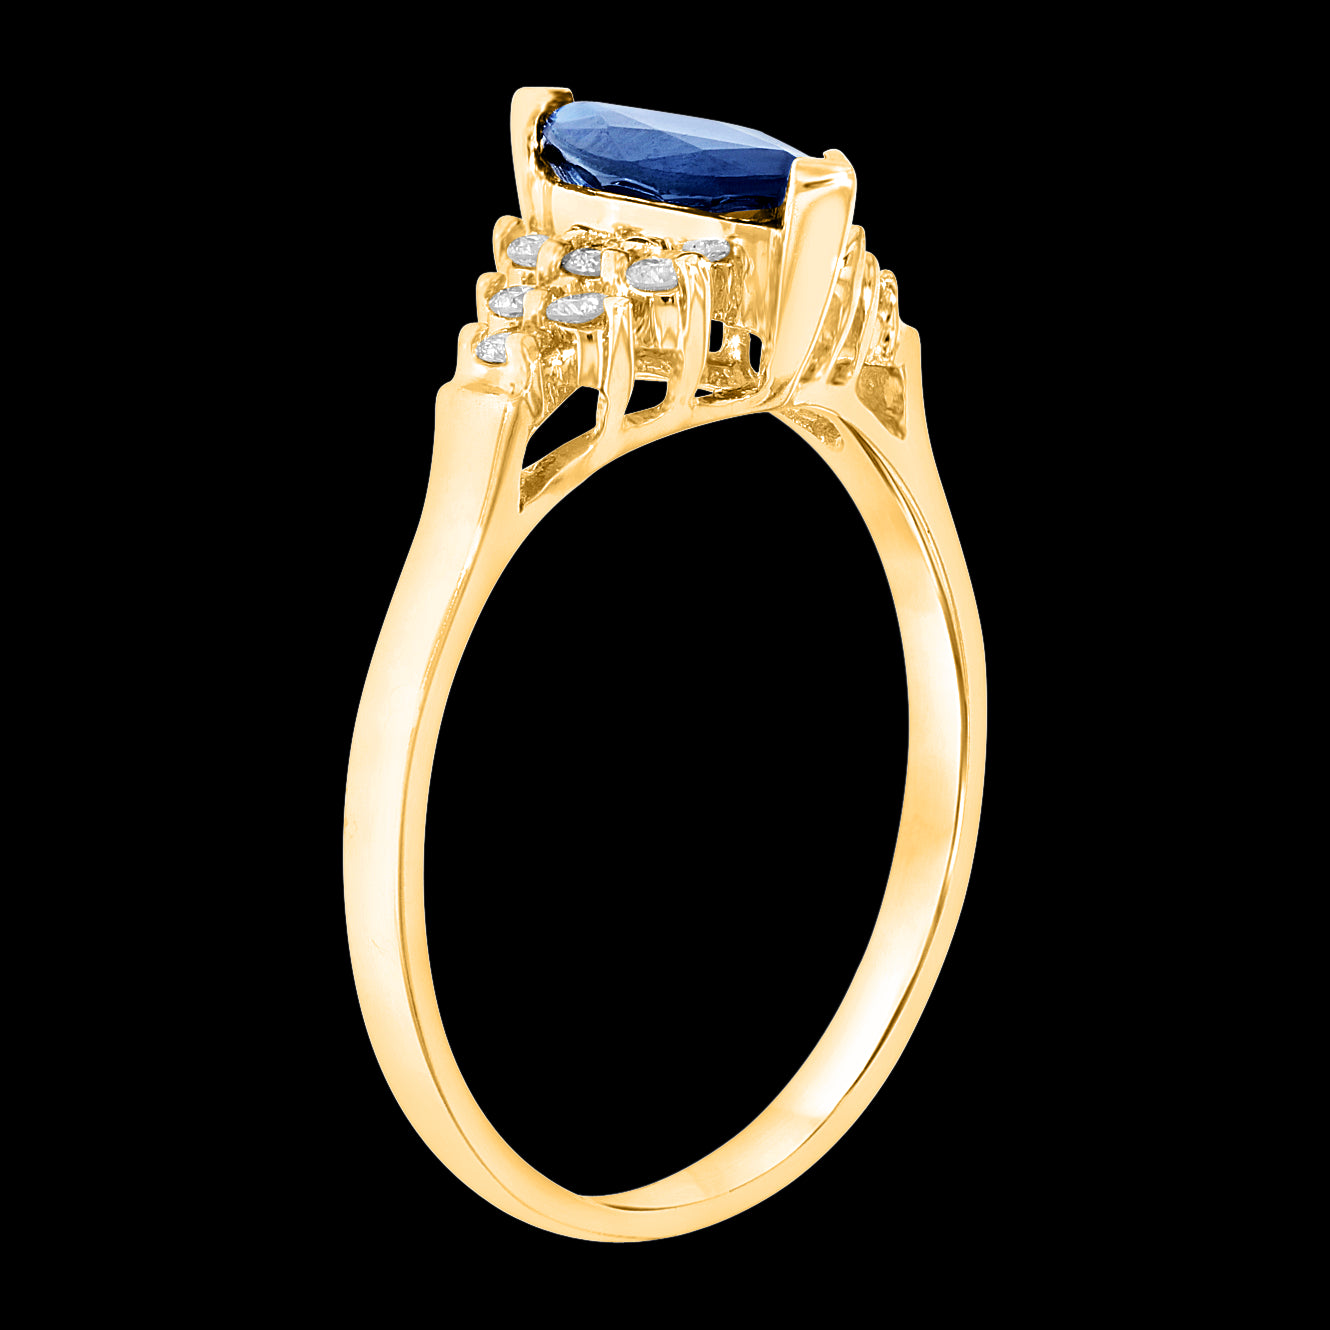 2/3ct Marquise-Cut Blue Sapphire & Diamond Ring in 14k White Gold